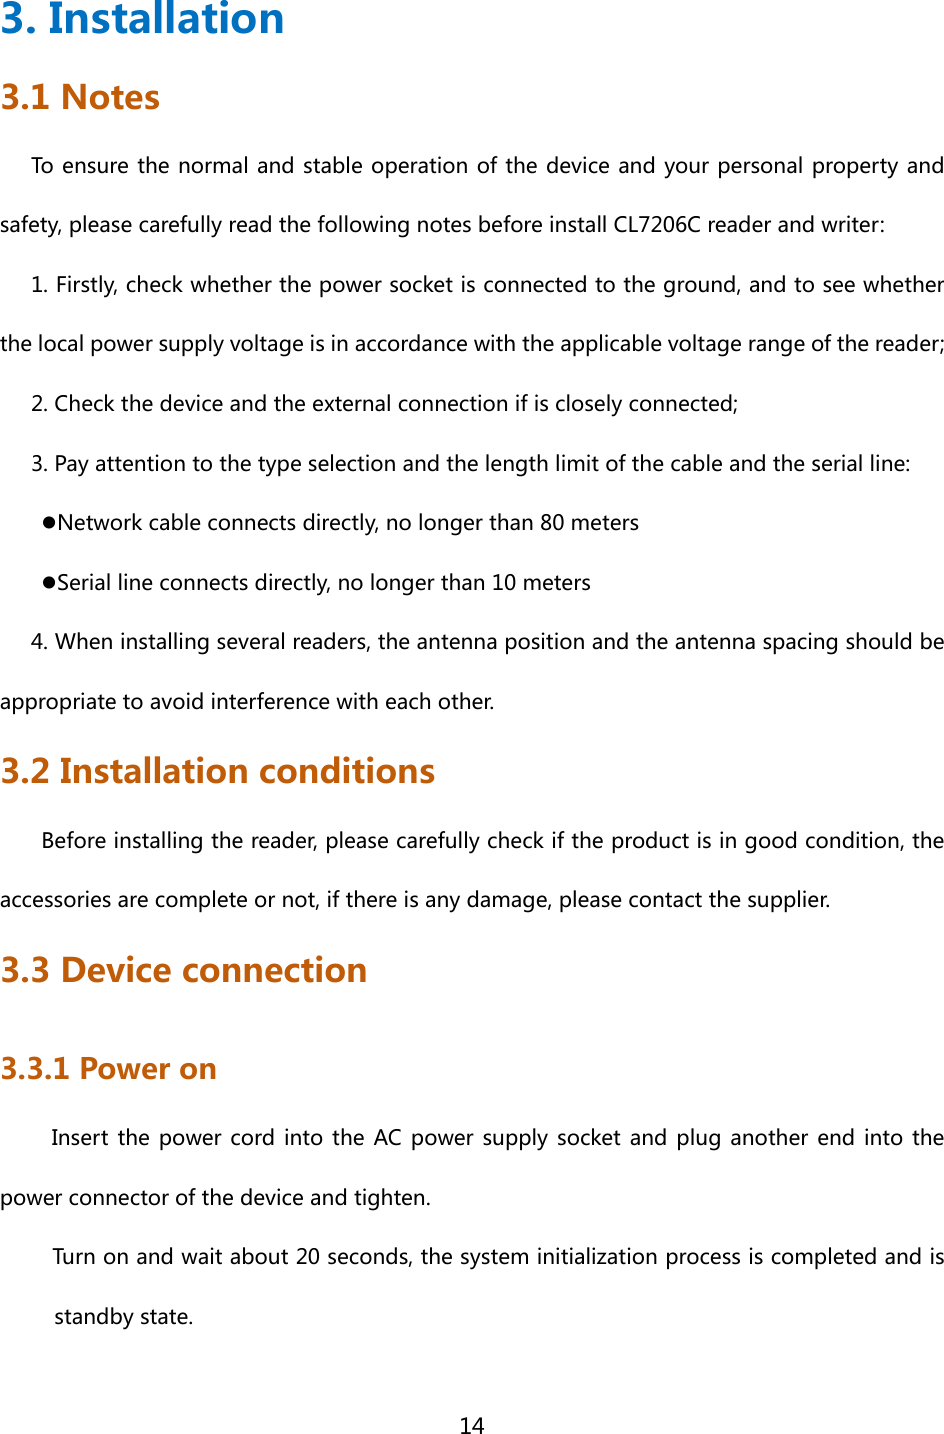  14  3. Installation 3.1 Notes To ensure the normal and stable operation of the device and your personal property and safety, please carefully read the following notes before install CL7206C reader and writer: 1. Firstly, check whether the power socket is connected to the ground, and to see whether the local power supply voltage is in accordance with the applicable voltage range of the reader; 2. Check the device and the external connection if is closely connected; 3. Pay attention to the type selection and the length limit of the cable and the serial line:  Network cable connects directly, no longer than 80 meters  Serial line connects directly, no longer than 10 meters 4. When installing several readers, the antenna position and the antenna spacing should be appropriate to avoid interference with each other. 3.2 Installation conditions Before installing the reader, please carefully check if the product is in good condition, the accessories are complete or not, if there is any damage, please contact the supplier. 3.3 Device connection 3.3.1 Power on   Insert  the power  cord  into the  AC  power supply  socket and  plug another end into the power connector of the device and tighten. Turn on and wait about 20 seconds, the system initialization process is completed and is standby state. 